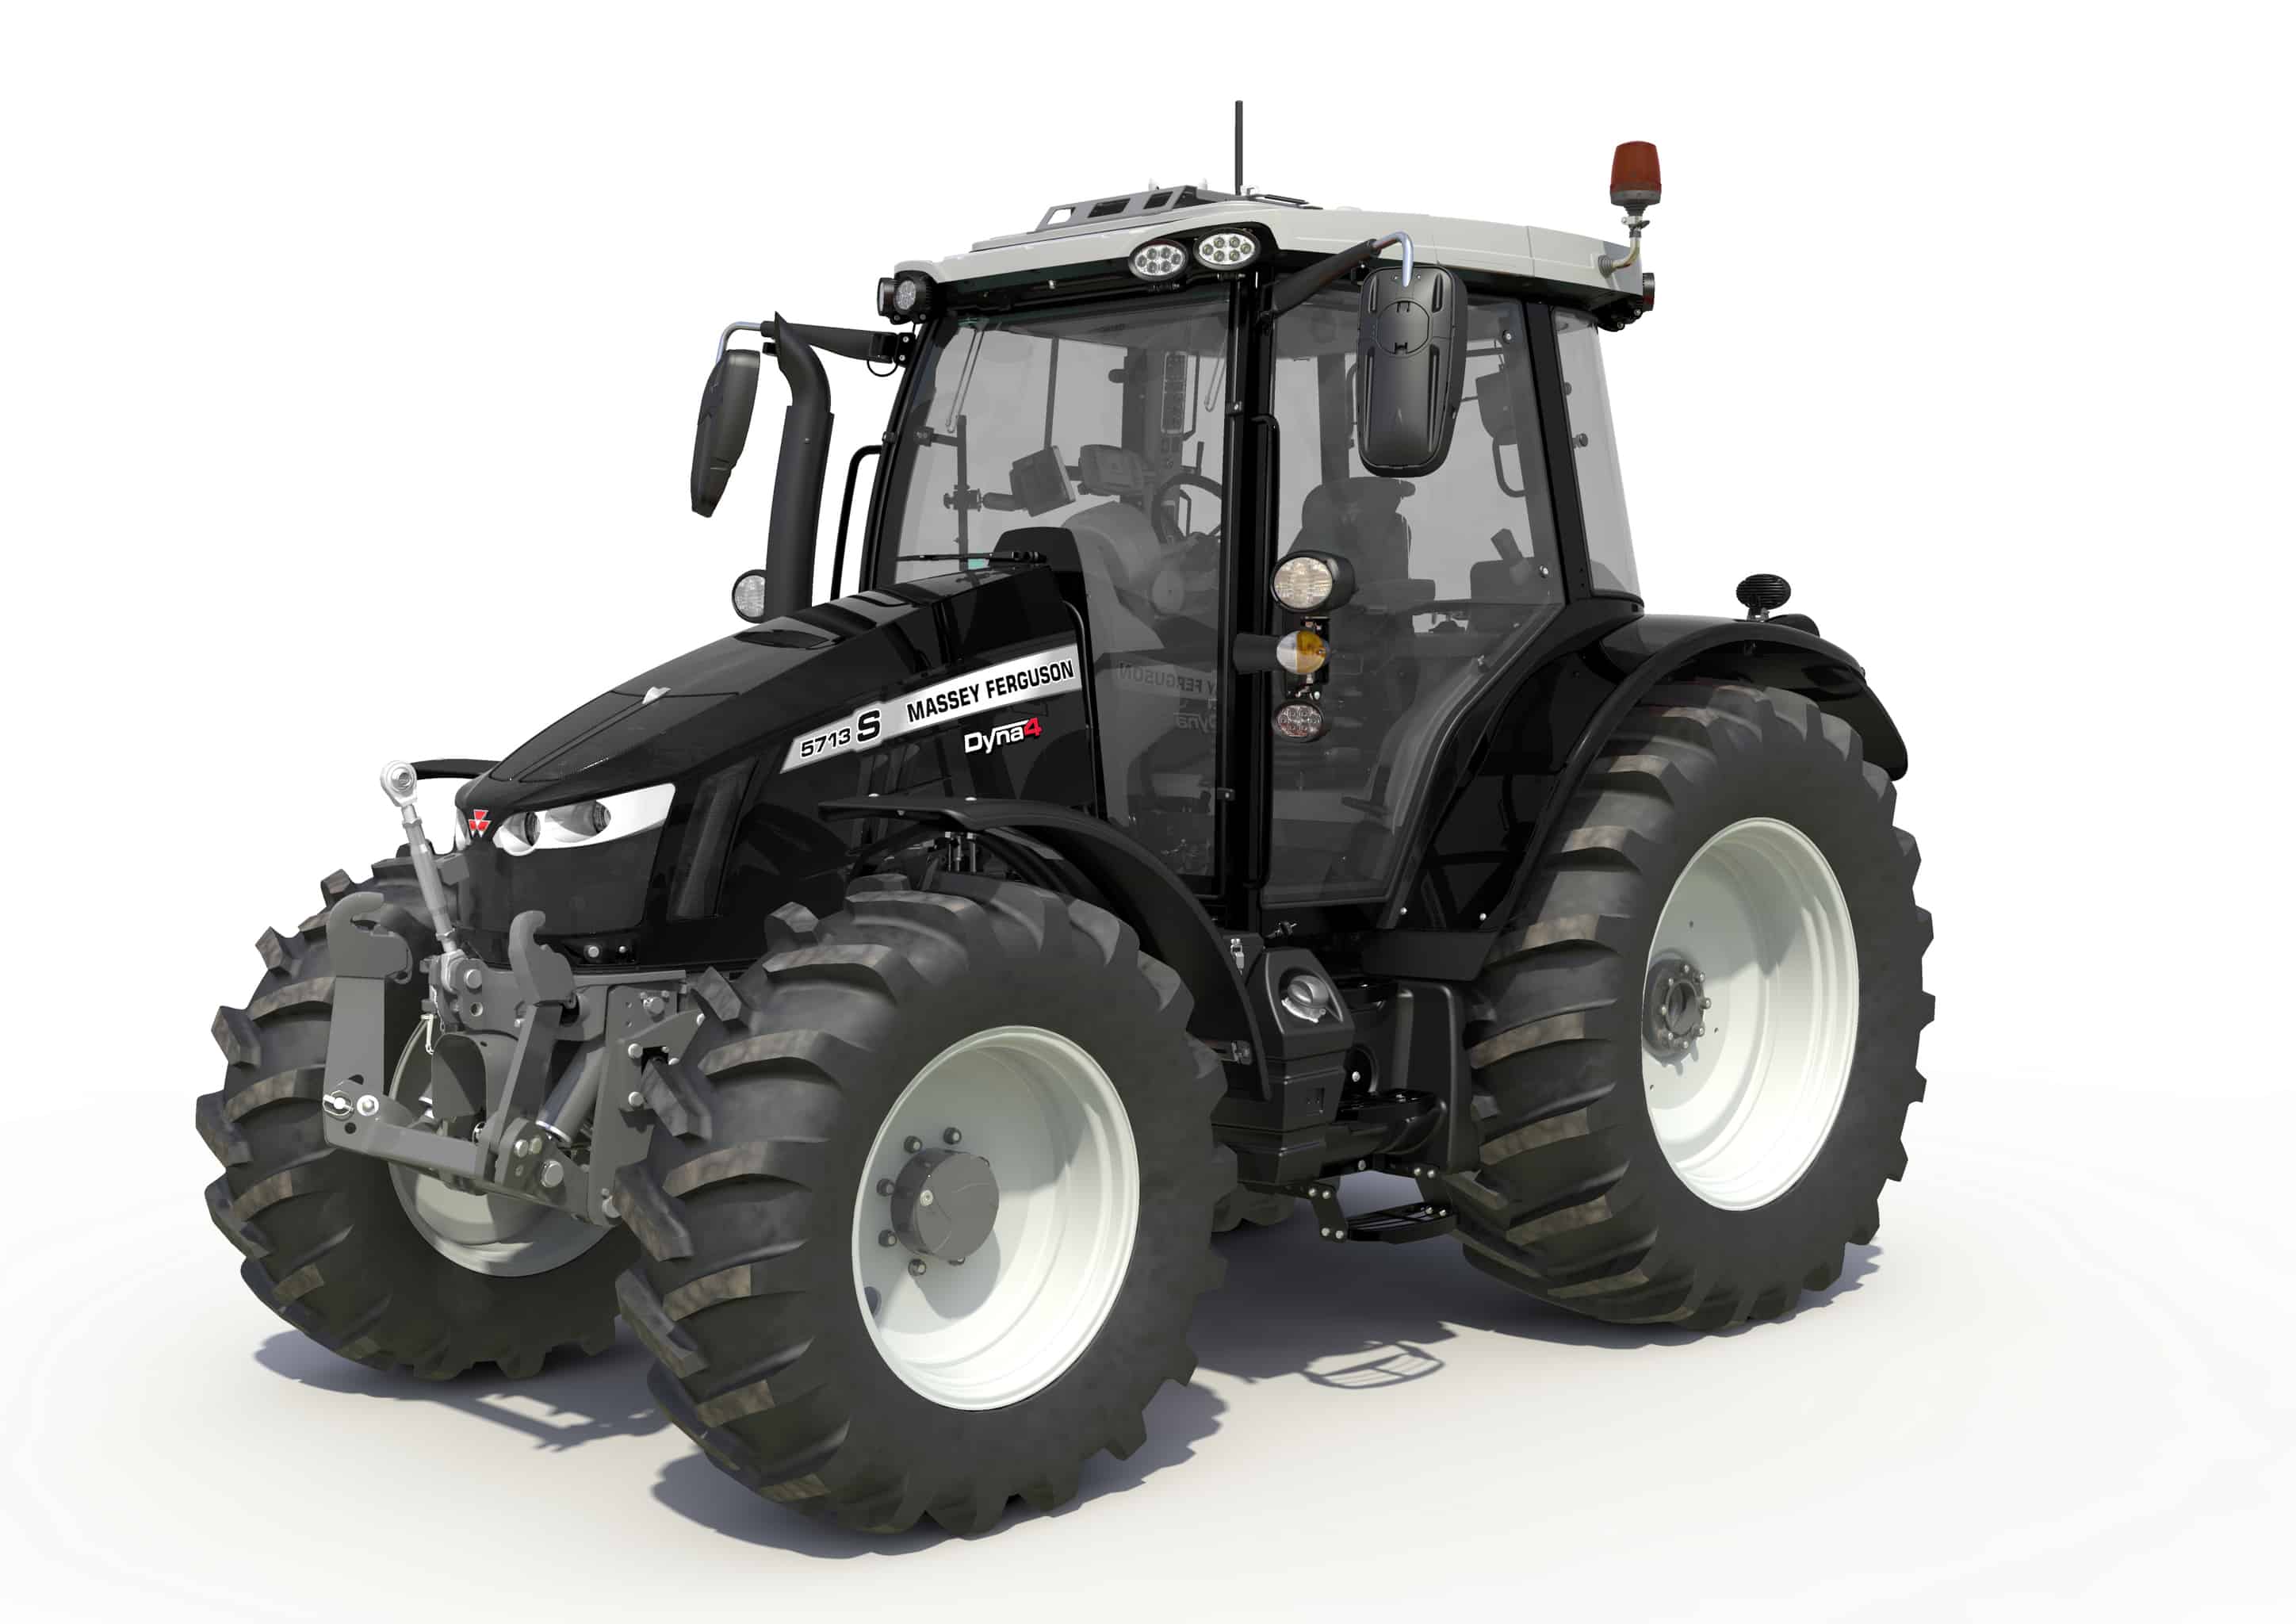 Massey Ferguson’s best sellers move up to the ‘NEXT’ level ...